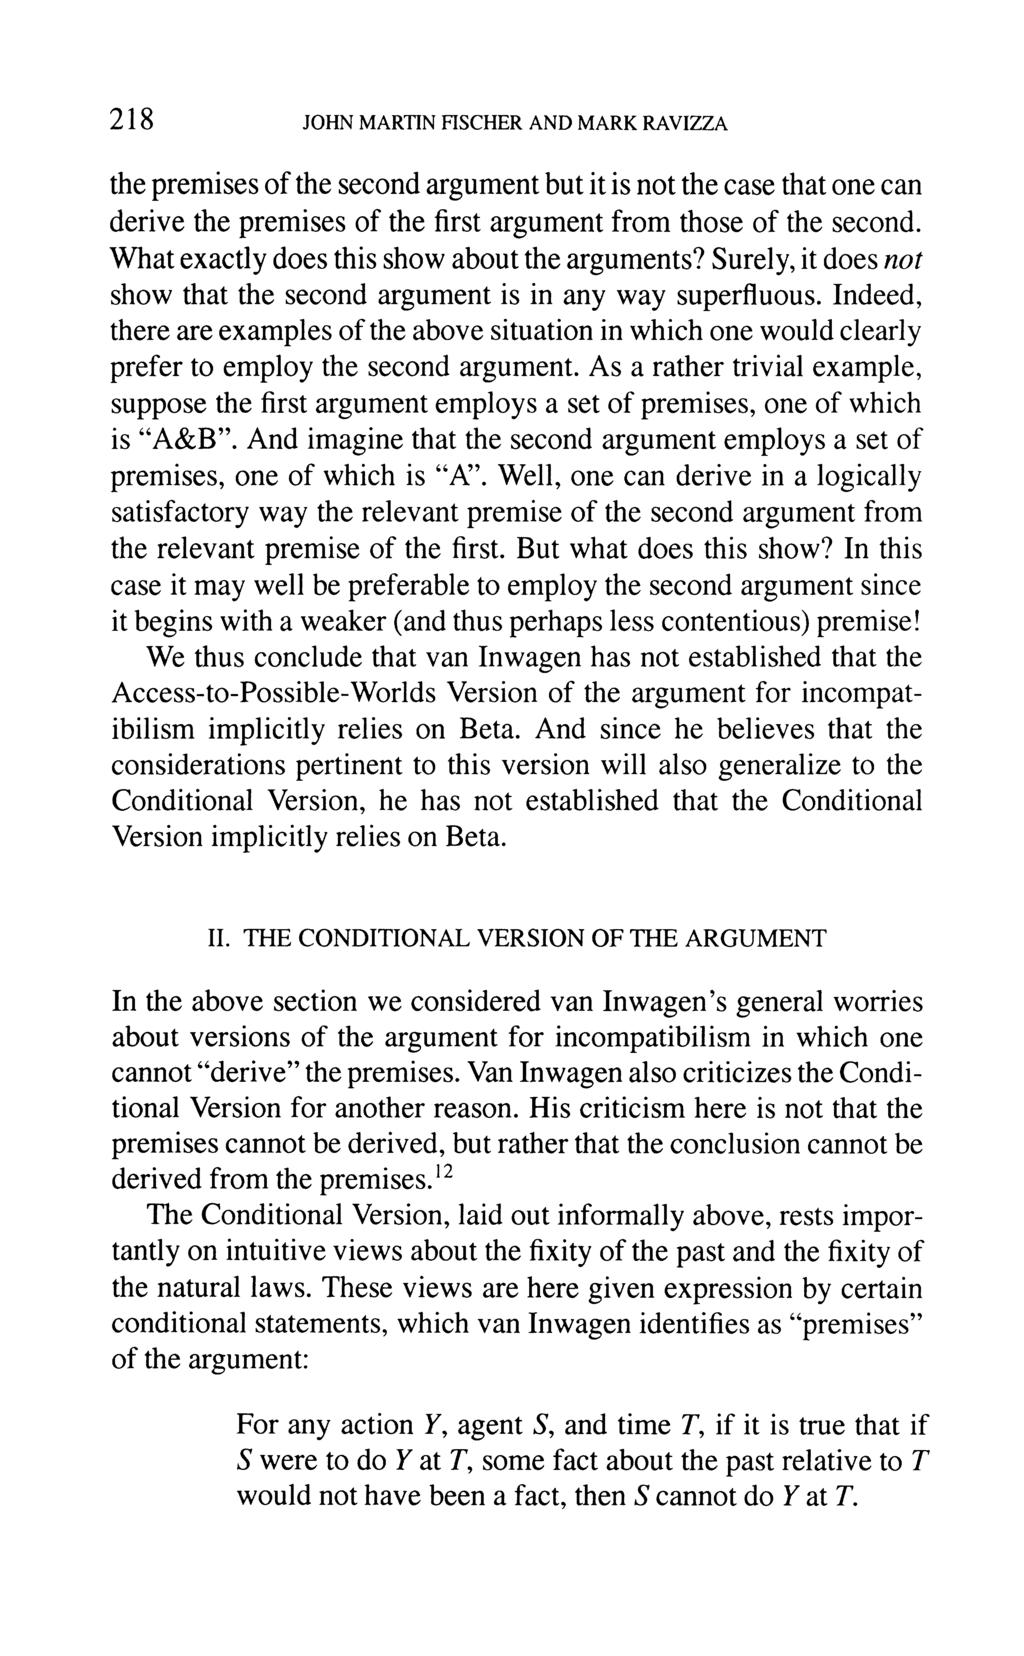 218 JOHN MARTIN FISCHER AND MARK RAVIZZA the premises of the second argument but it is not the case that one can derive the premises of the first argument from those of the second.